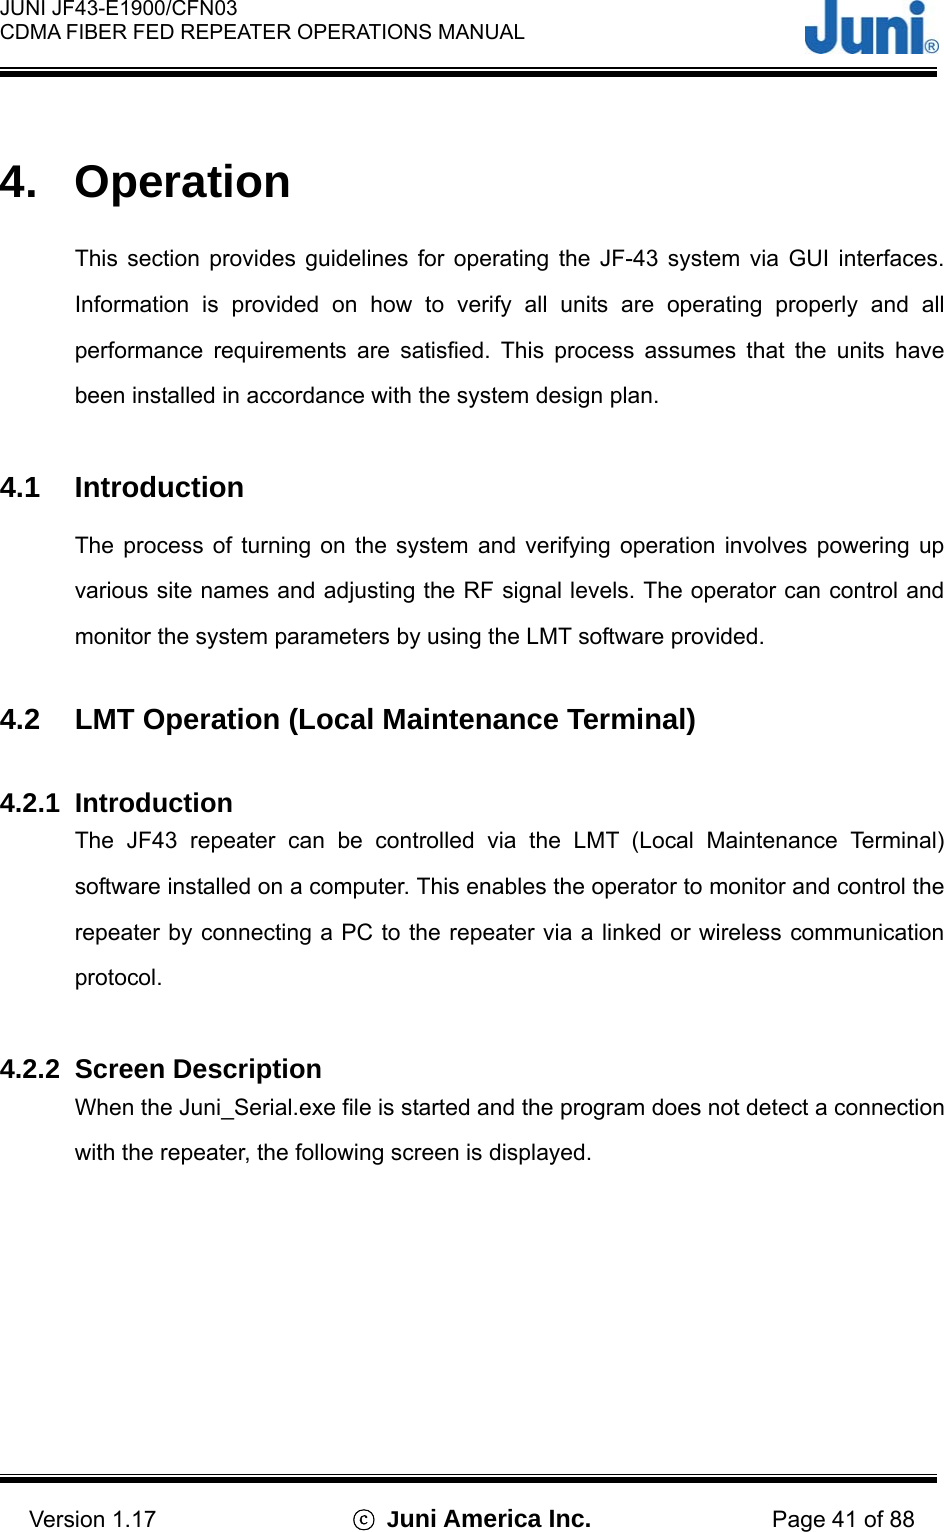  JUNI JF43-E1900/CFN03 CDMA FIBER FED REPEATER OPERATIONS MANUAL                                    Version 1.17  ⓒ Juni America Inc. Page 41 of 88  4. Operation  This section provides guidelines for operating the JF-43 system via GUI interfaces. Information is provided on how to verify all units are operating properly and all performance requirements are satisfied. This process assumes that the units have been installed in accordance with the system design plan.  4.1 Introduction The process of turning on the system and verifying operation involves powering up various site names and adjusting the RF signal levels. The operator can control and monitor the system parameters by using the LMT software provided.  4.2  LMT Operation (Local Maintenance Terminal)  4.2.1 Introduction The JF43 repeater can be controlled via the LMT (Local Maintenance Terminal) software installed on a computer. This enables the operator to monitor and control the repeater by connecting a PC to the repeater via a linked or wireless communication protocol.   4.2.2 Screen Description When the Juni_Serial.exe file is started and the program does not detect a connection with the repeater, the following screen is displayed. 